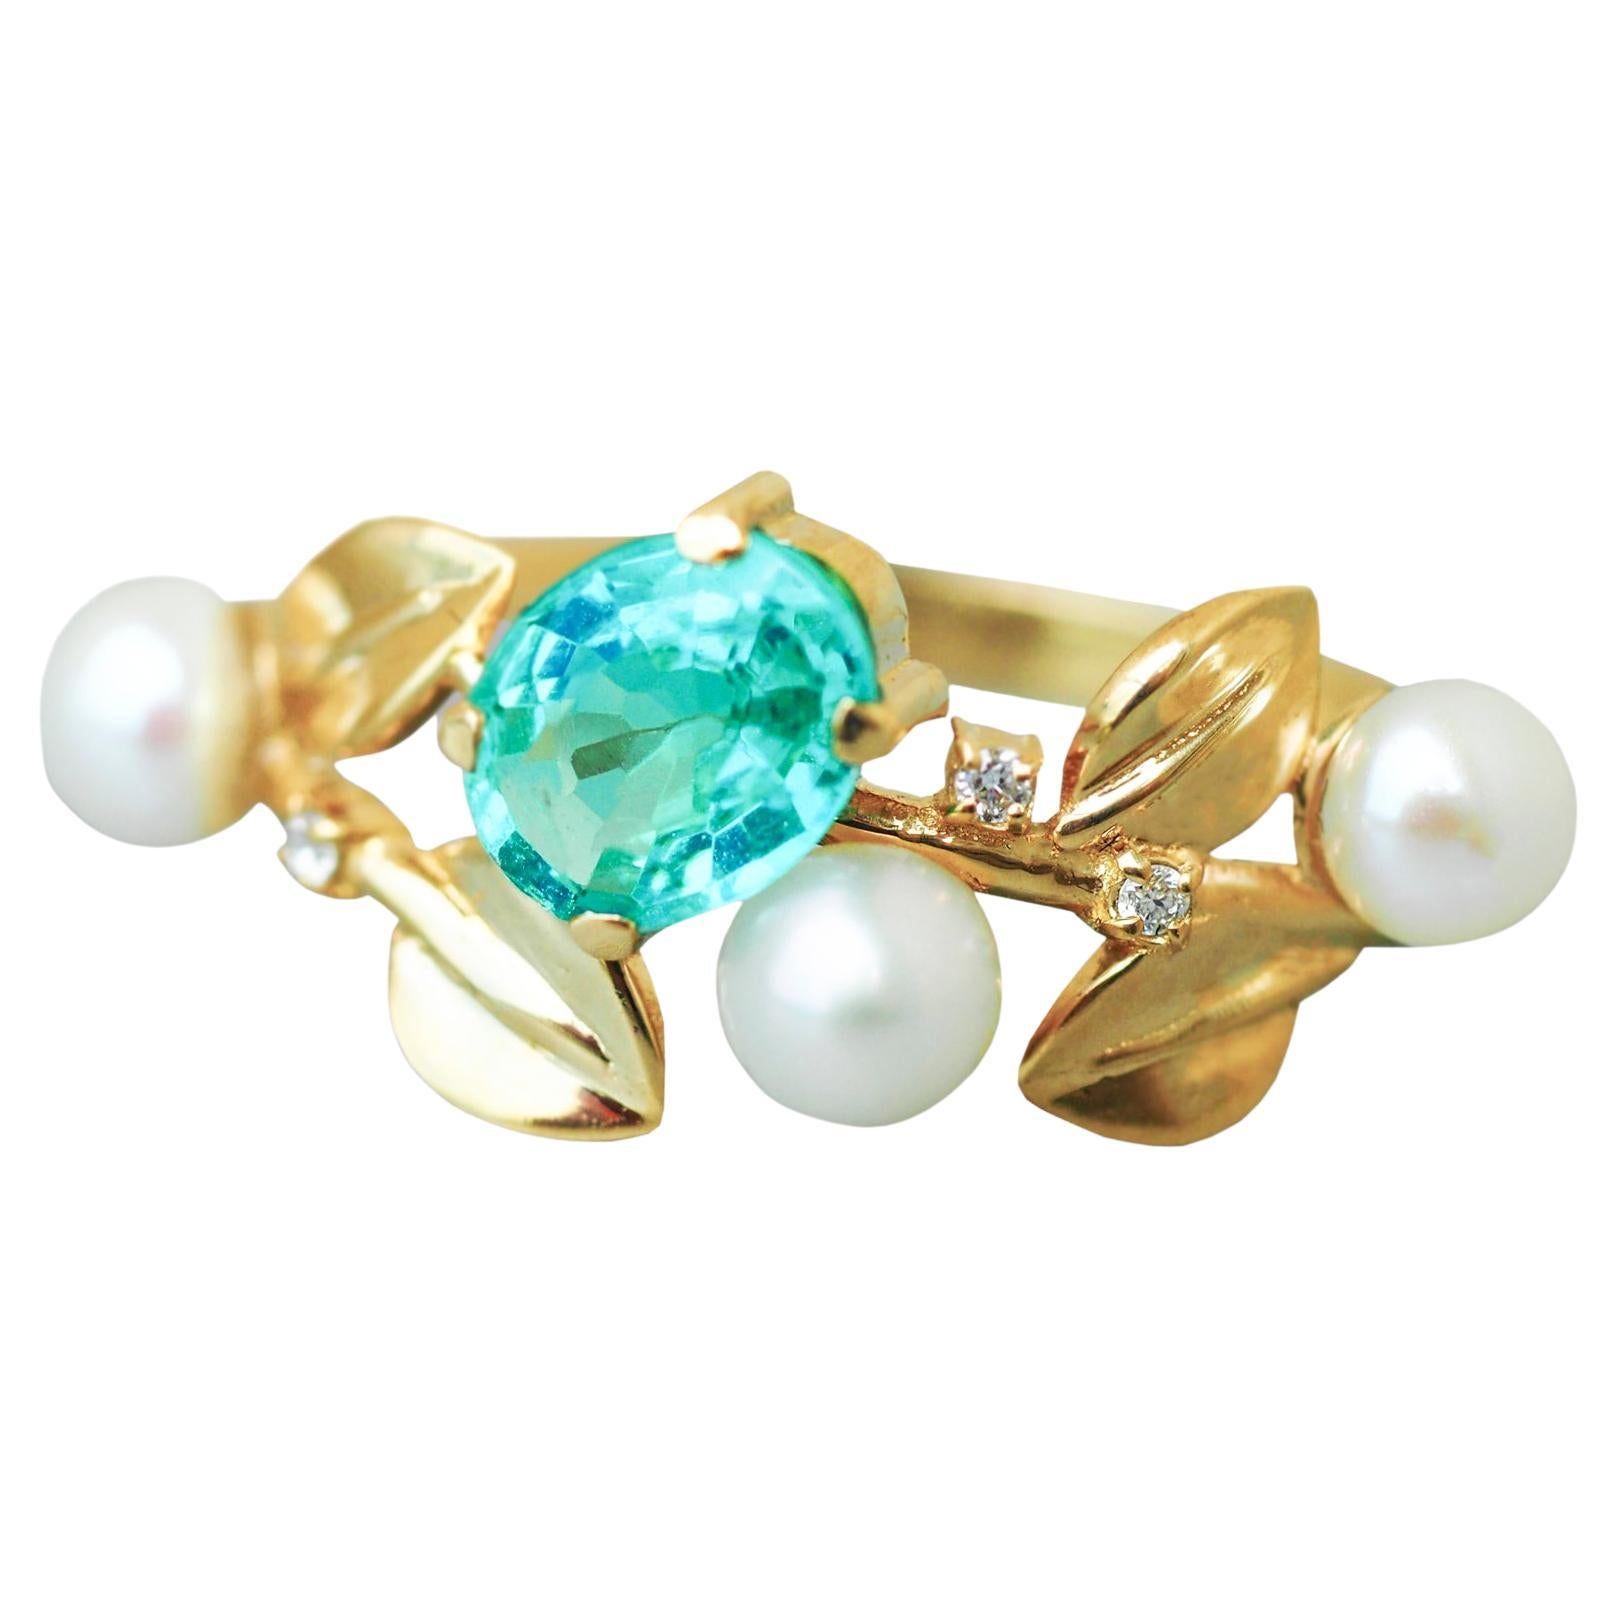 For Sale:  14k Gold Floral Ring with Oval Apatite, Diamonds and Pearls